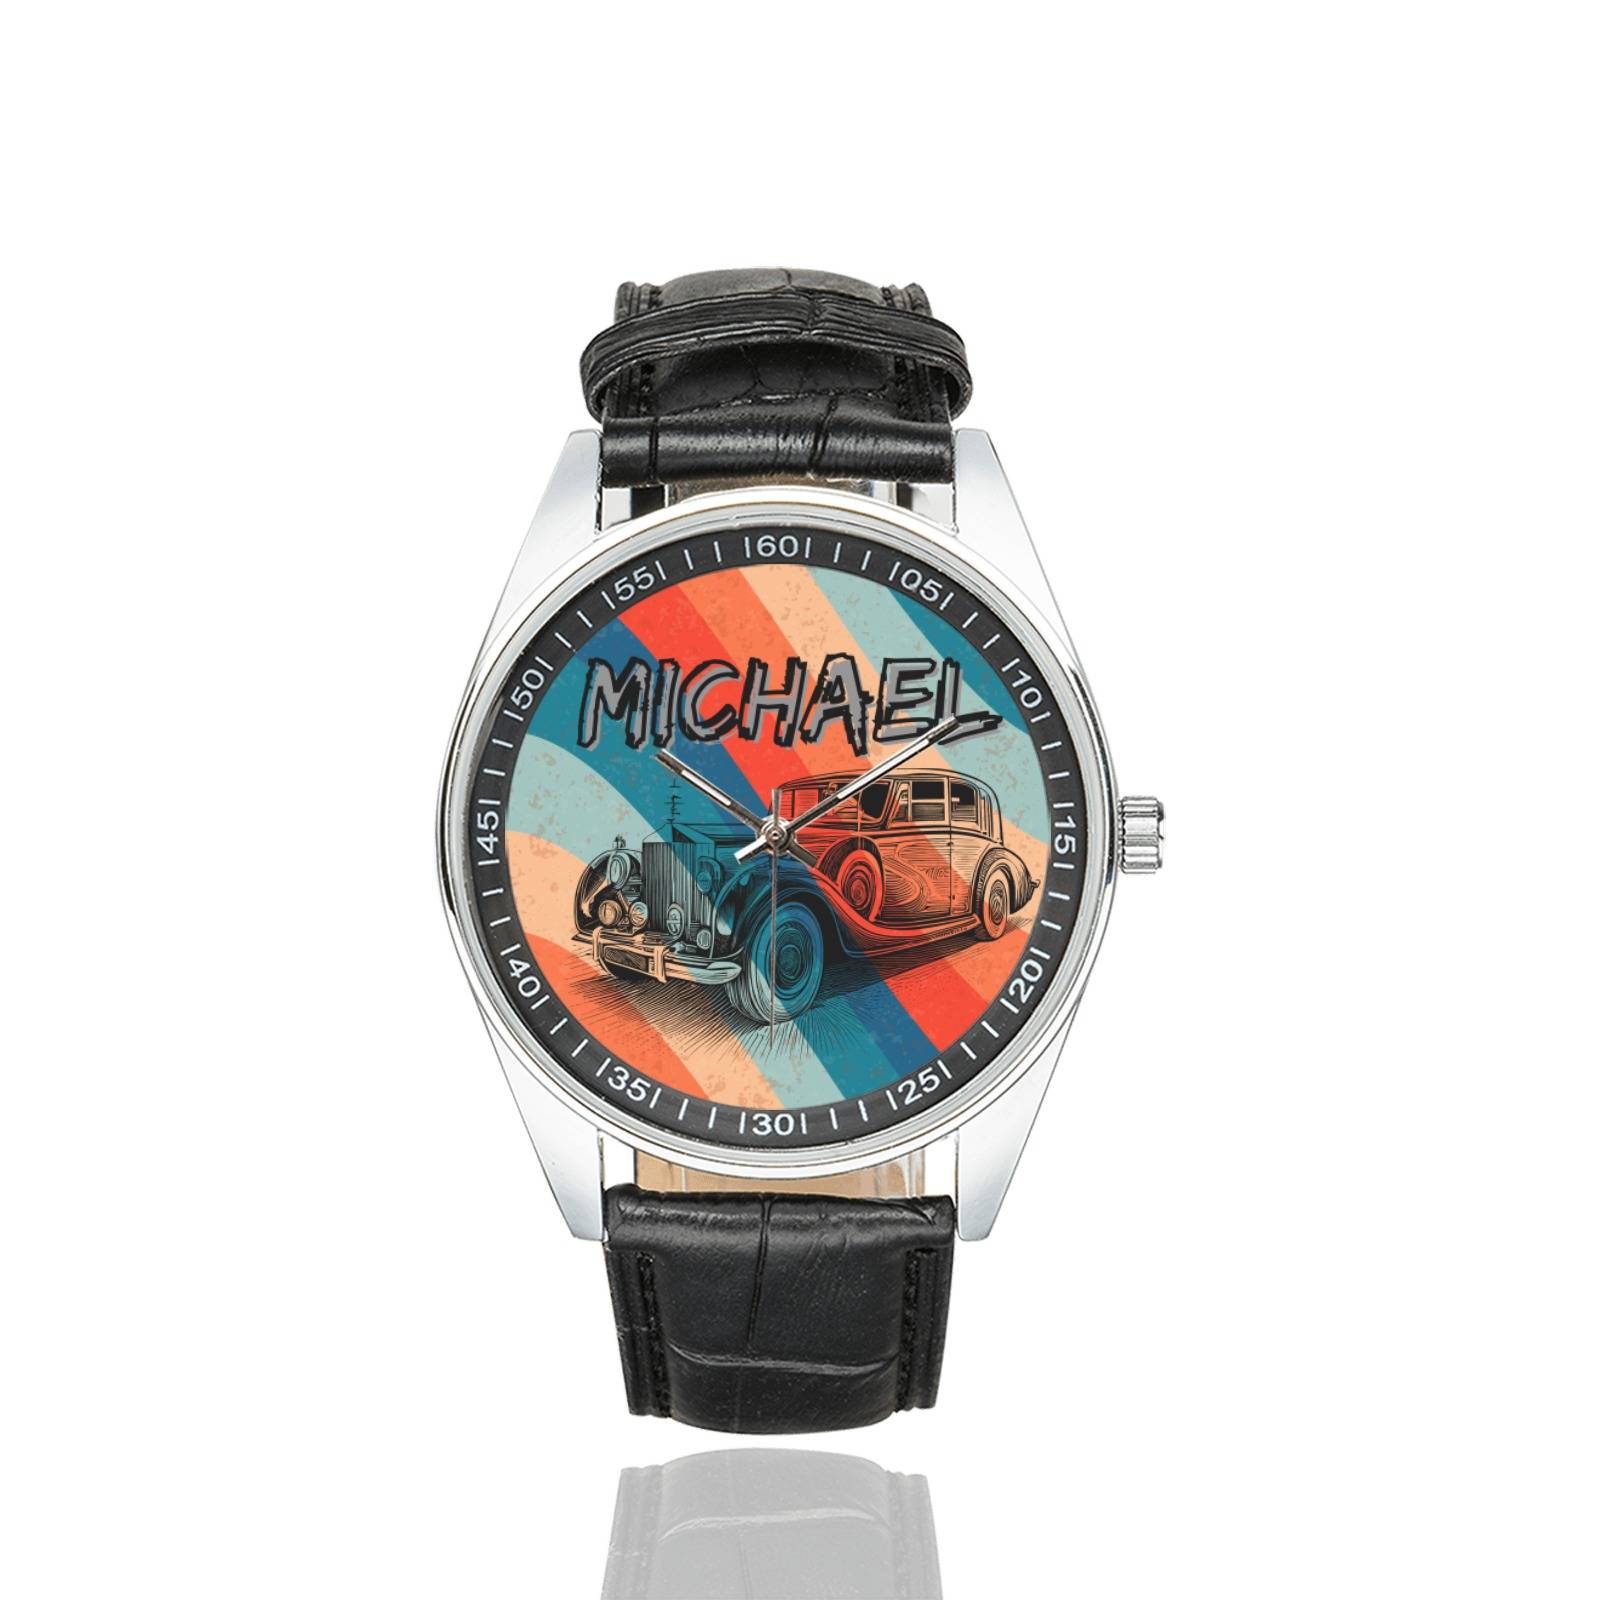 Personalized BK11 Casual  Leather Strap Watch